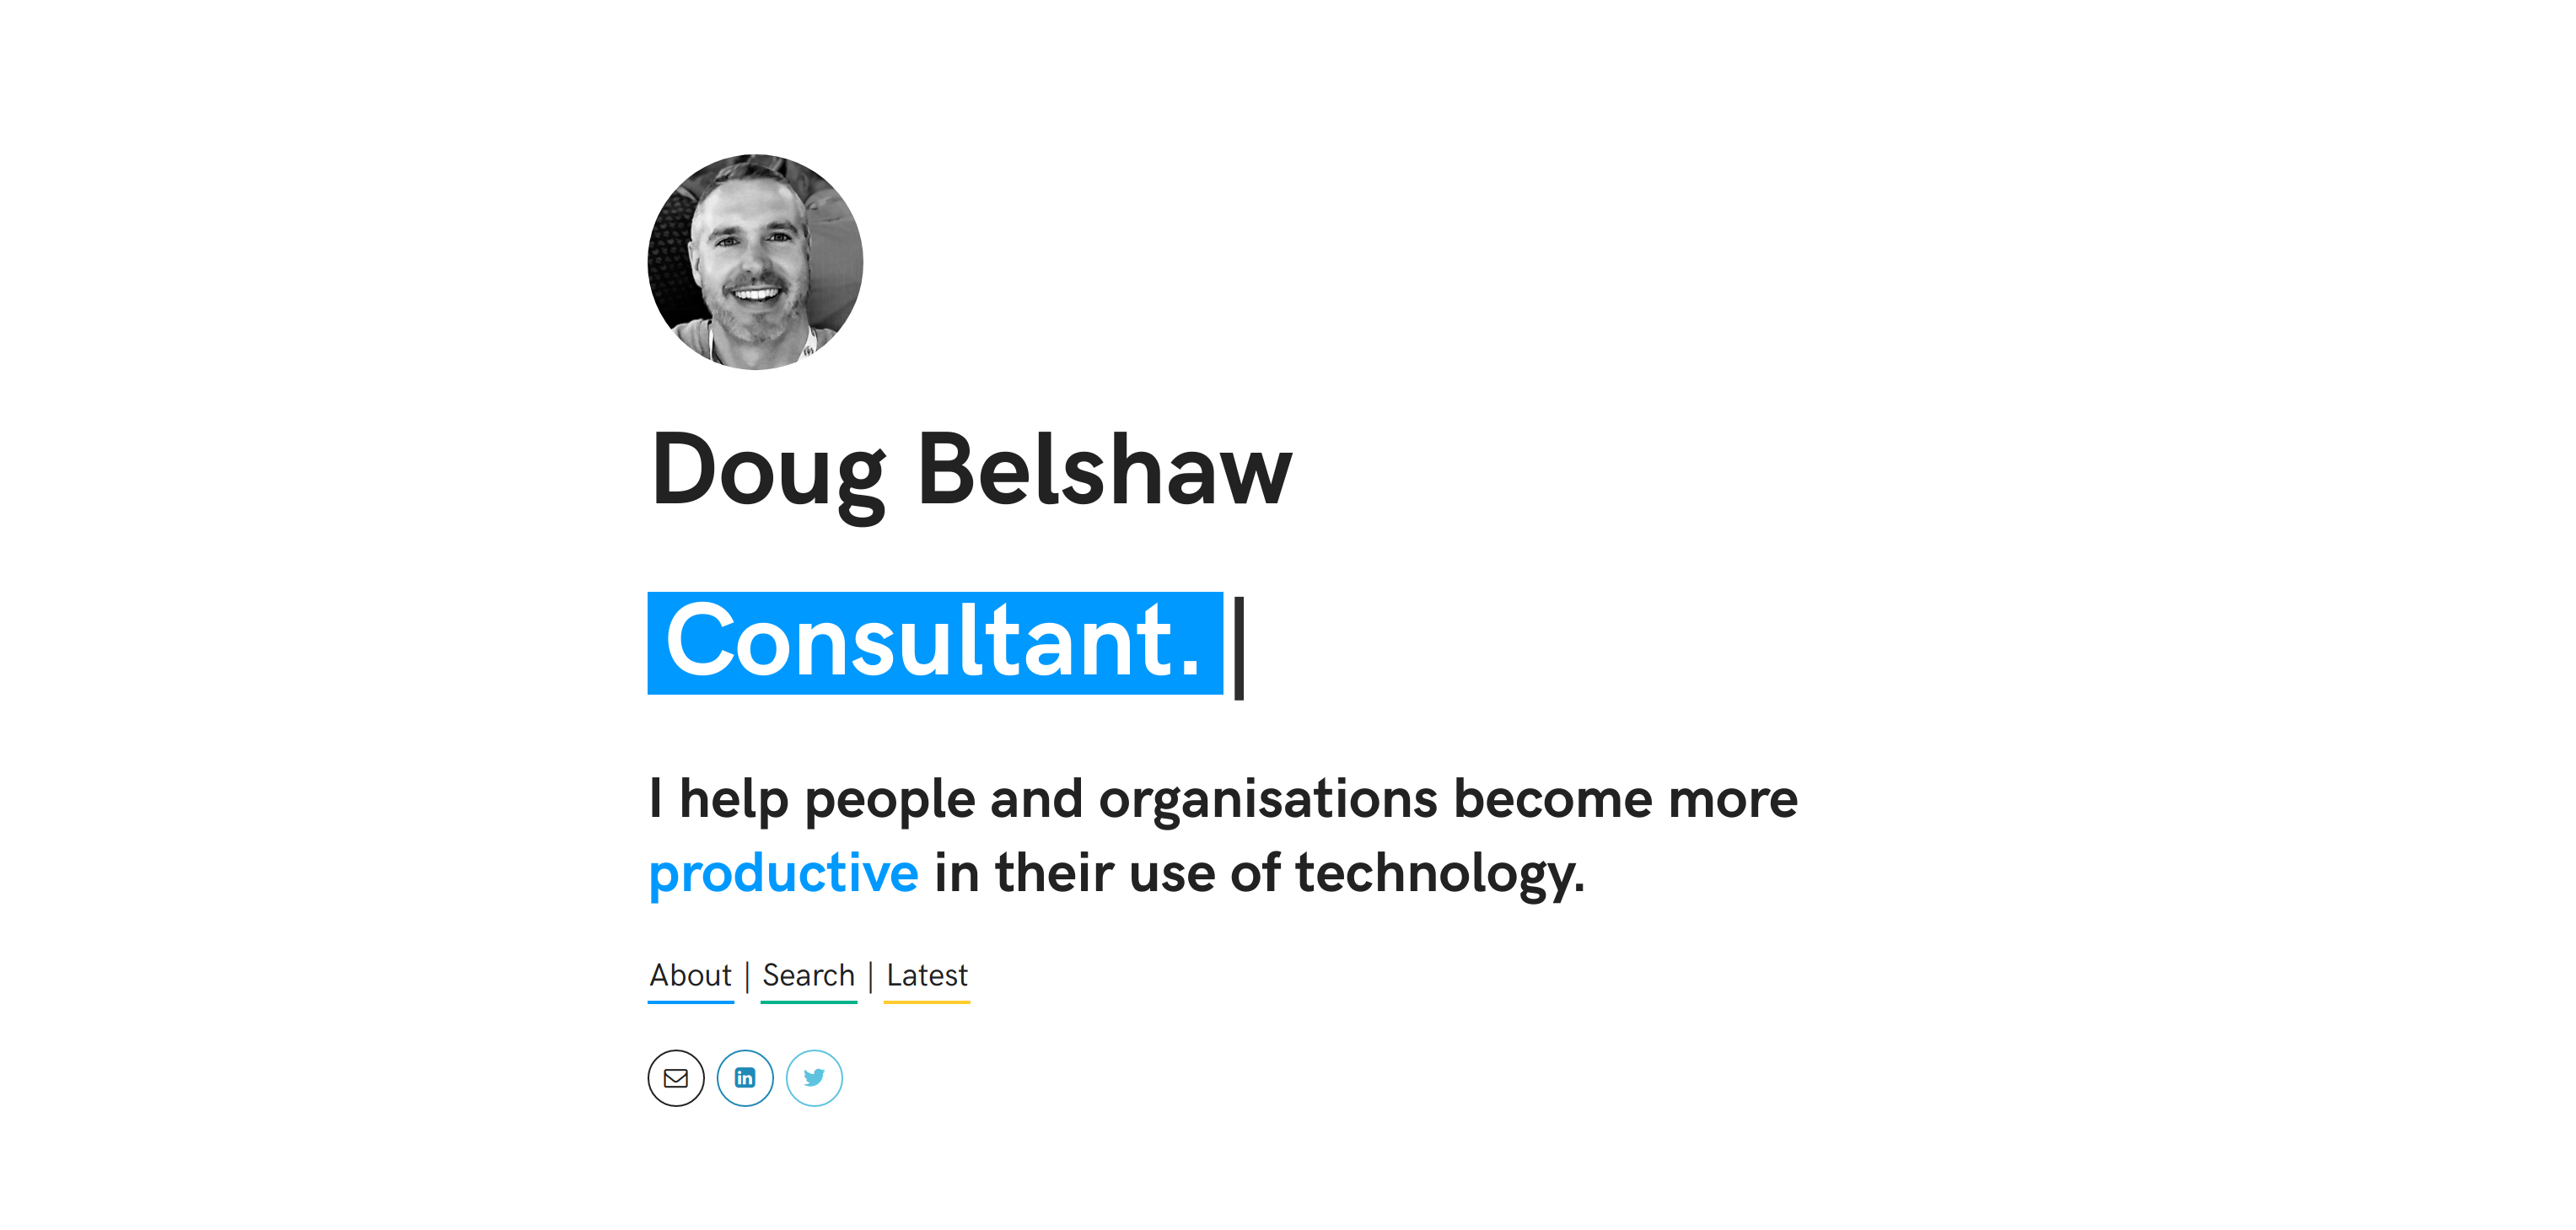 Redesigning dougbelshaw.com